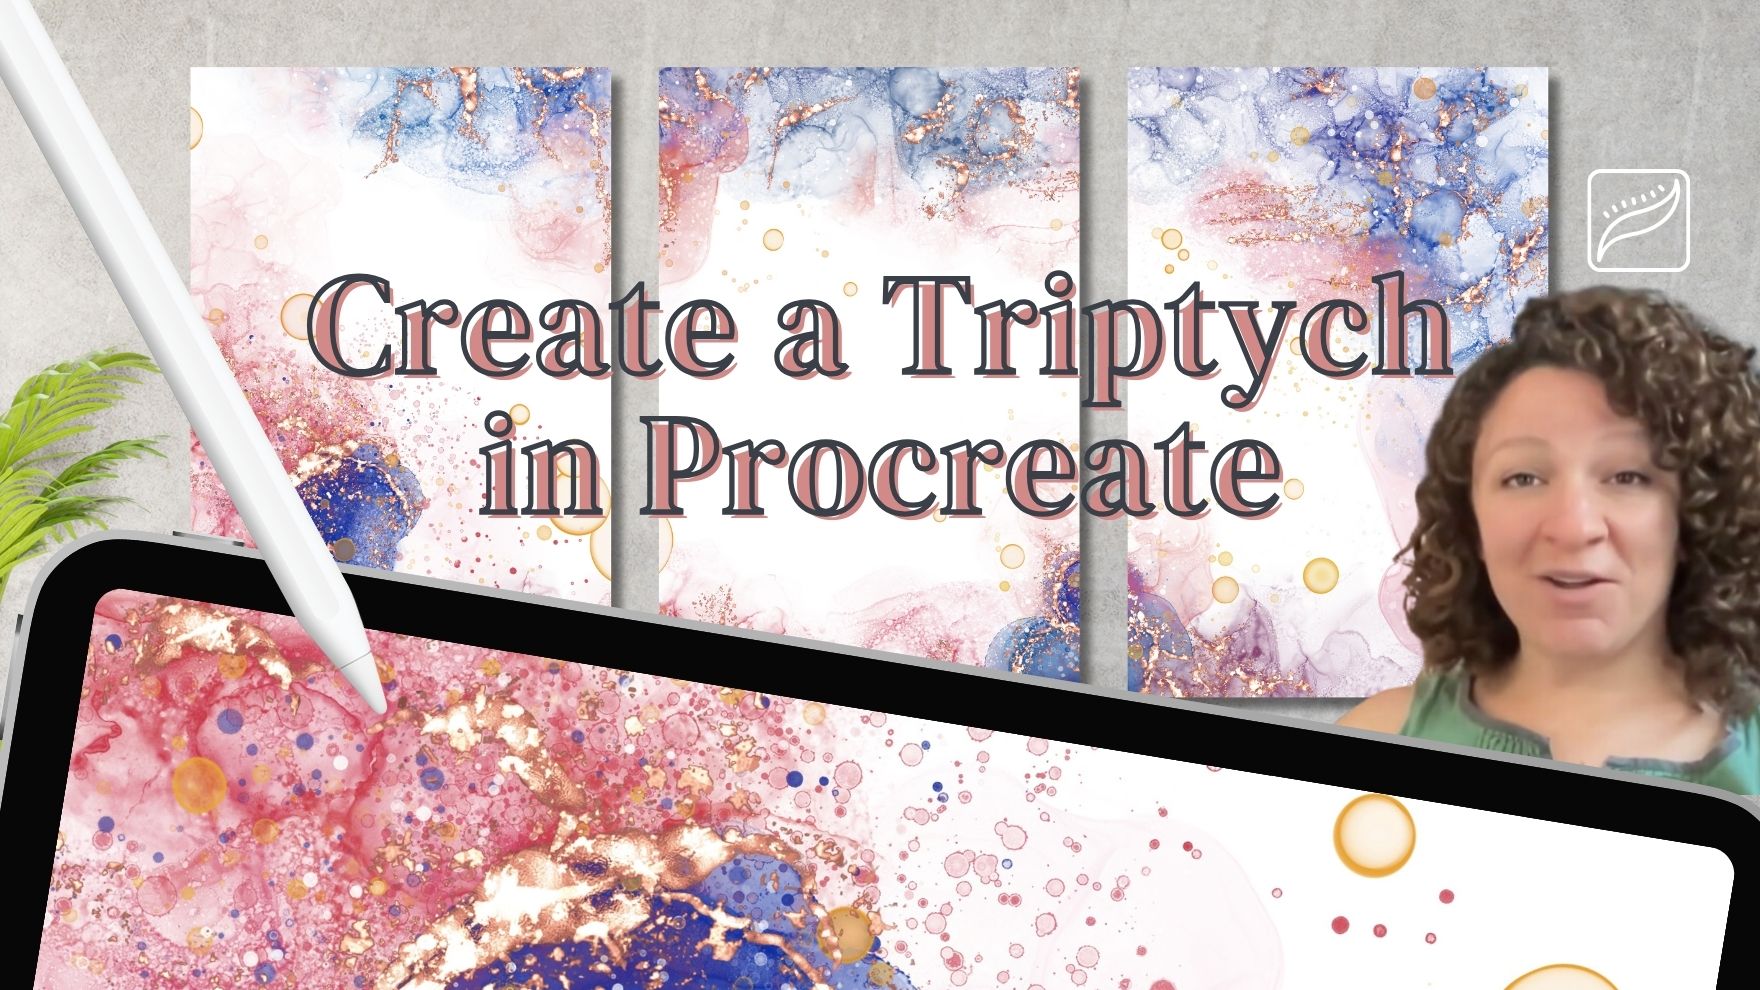 Triptych artwork painted in Procreate, orange, blue and purple abstract panels